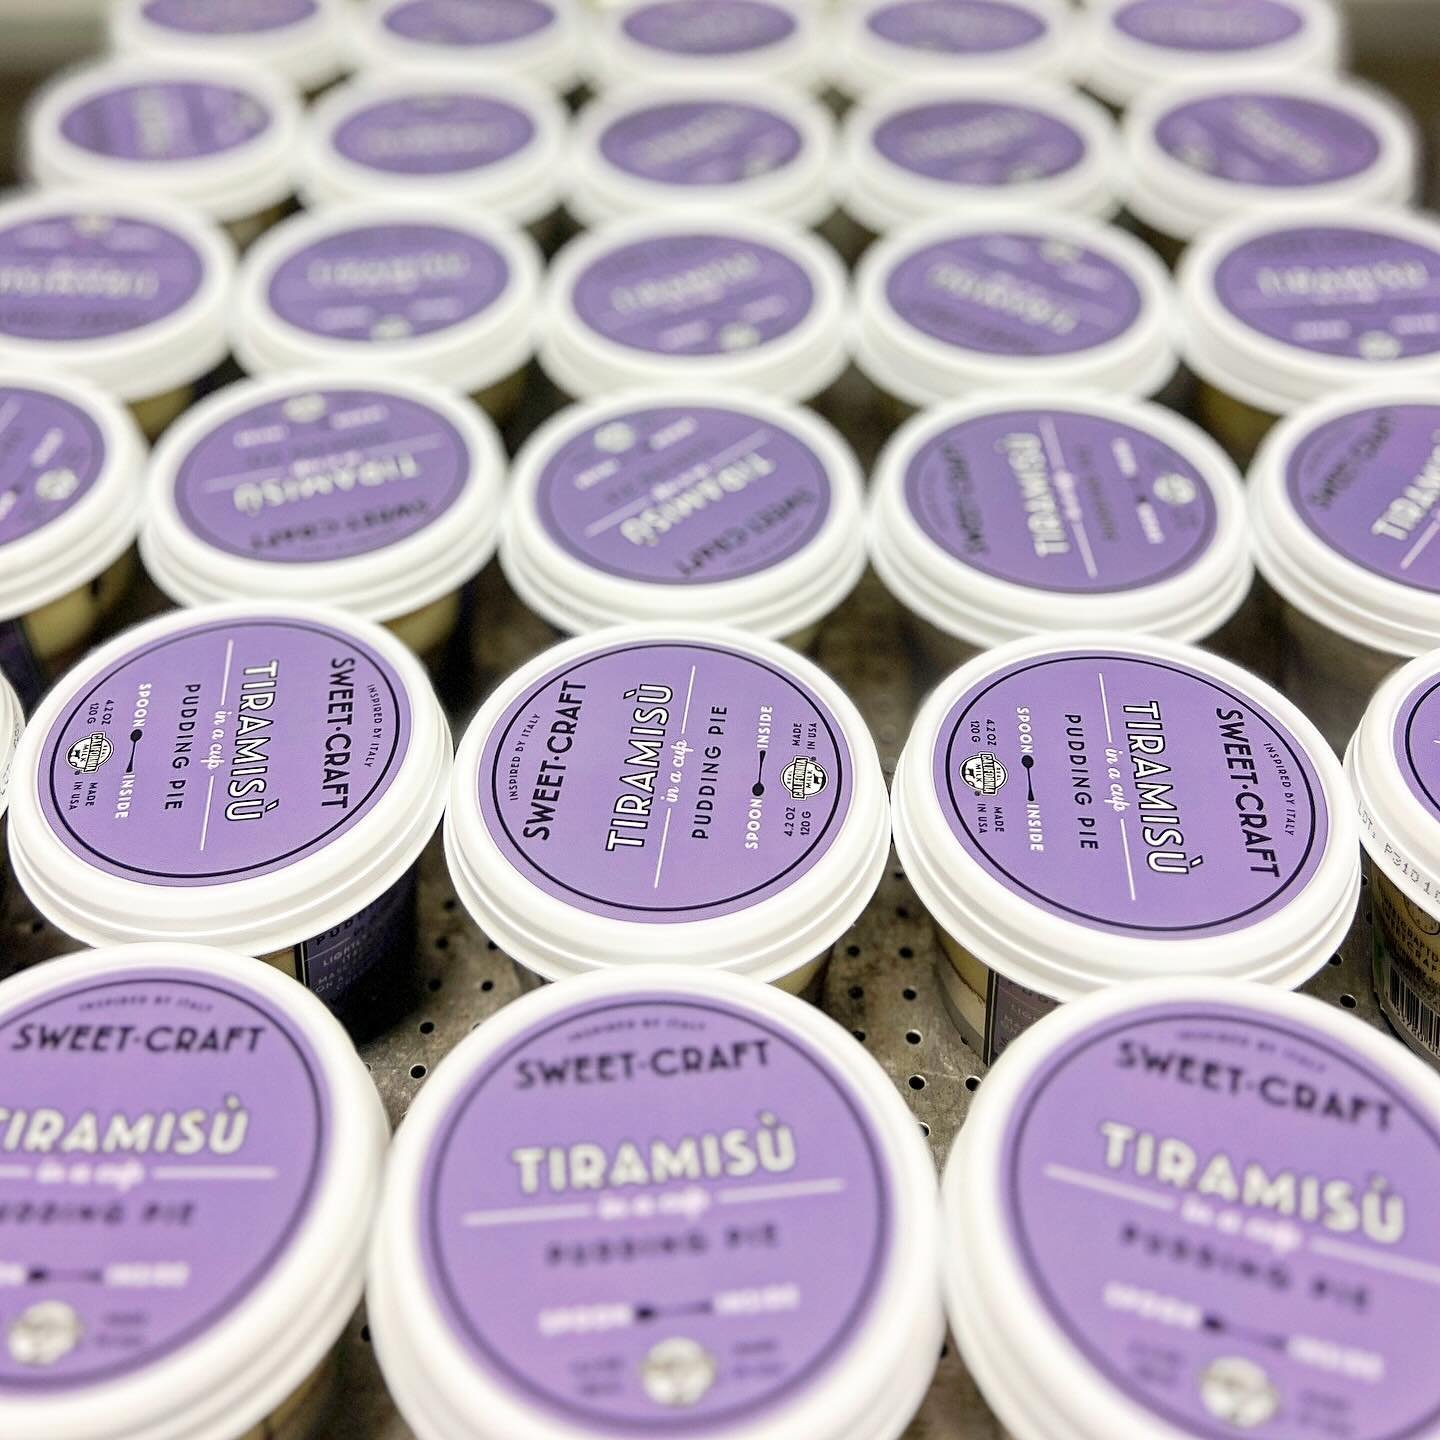 Always dreamin of Tiramis&ugrave; 😍 you too? Now you can find our new 4.2 oz Tiramis&ugrave; Pudding Pie in @target Superstores across the country!

#SweetCraftDolceria #Tiramisu #ElevatedSnacking